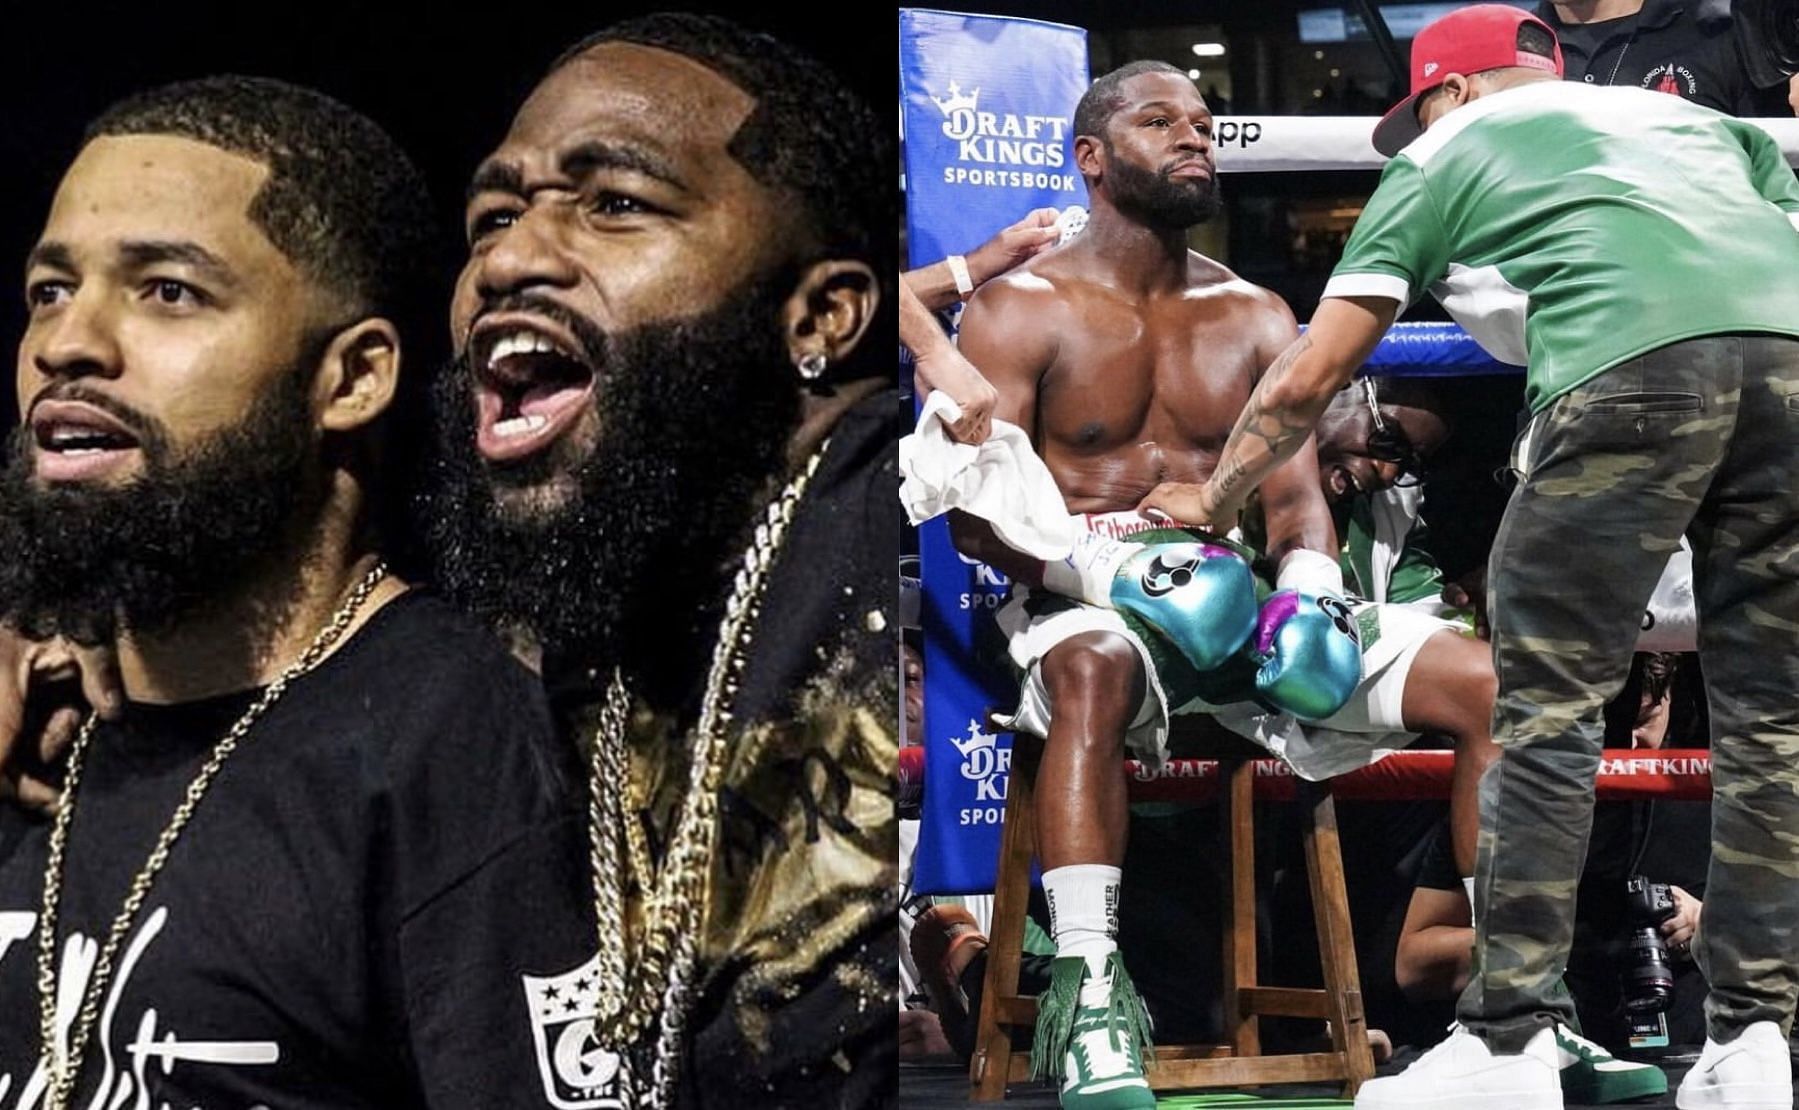 Trainer GT and Adrien Broner (left), Floyd Mayweather Jr. (right) - Images via @gt_the_great_ on Instagram